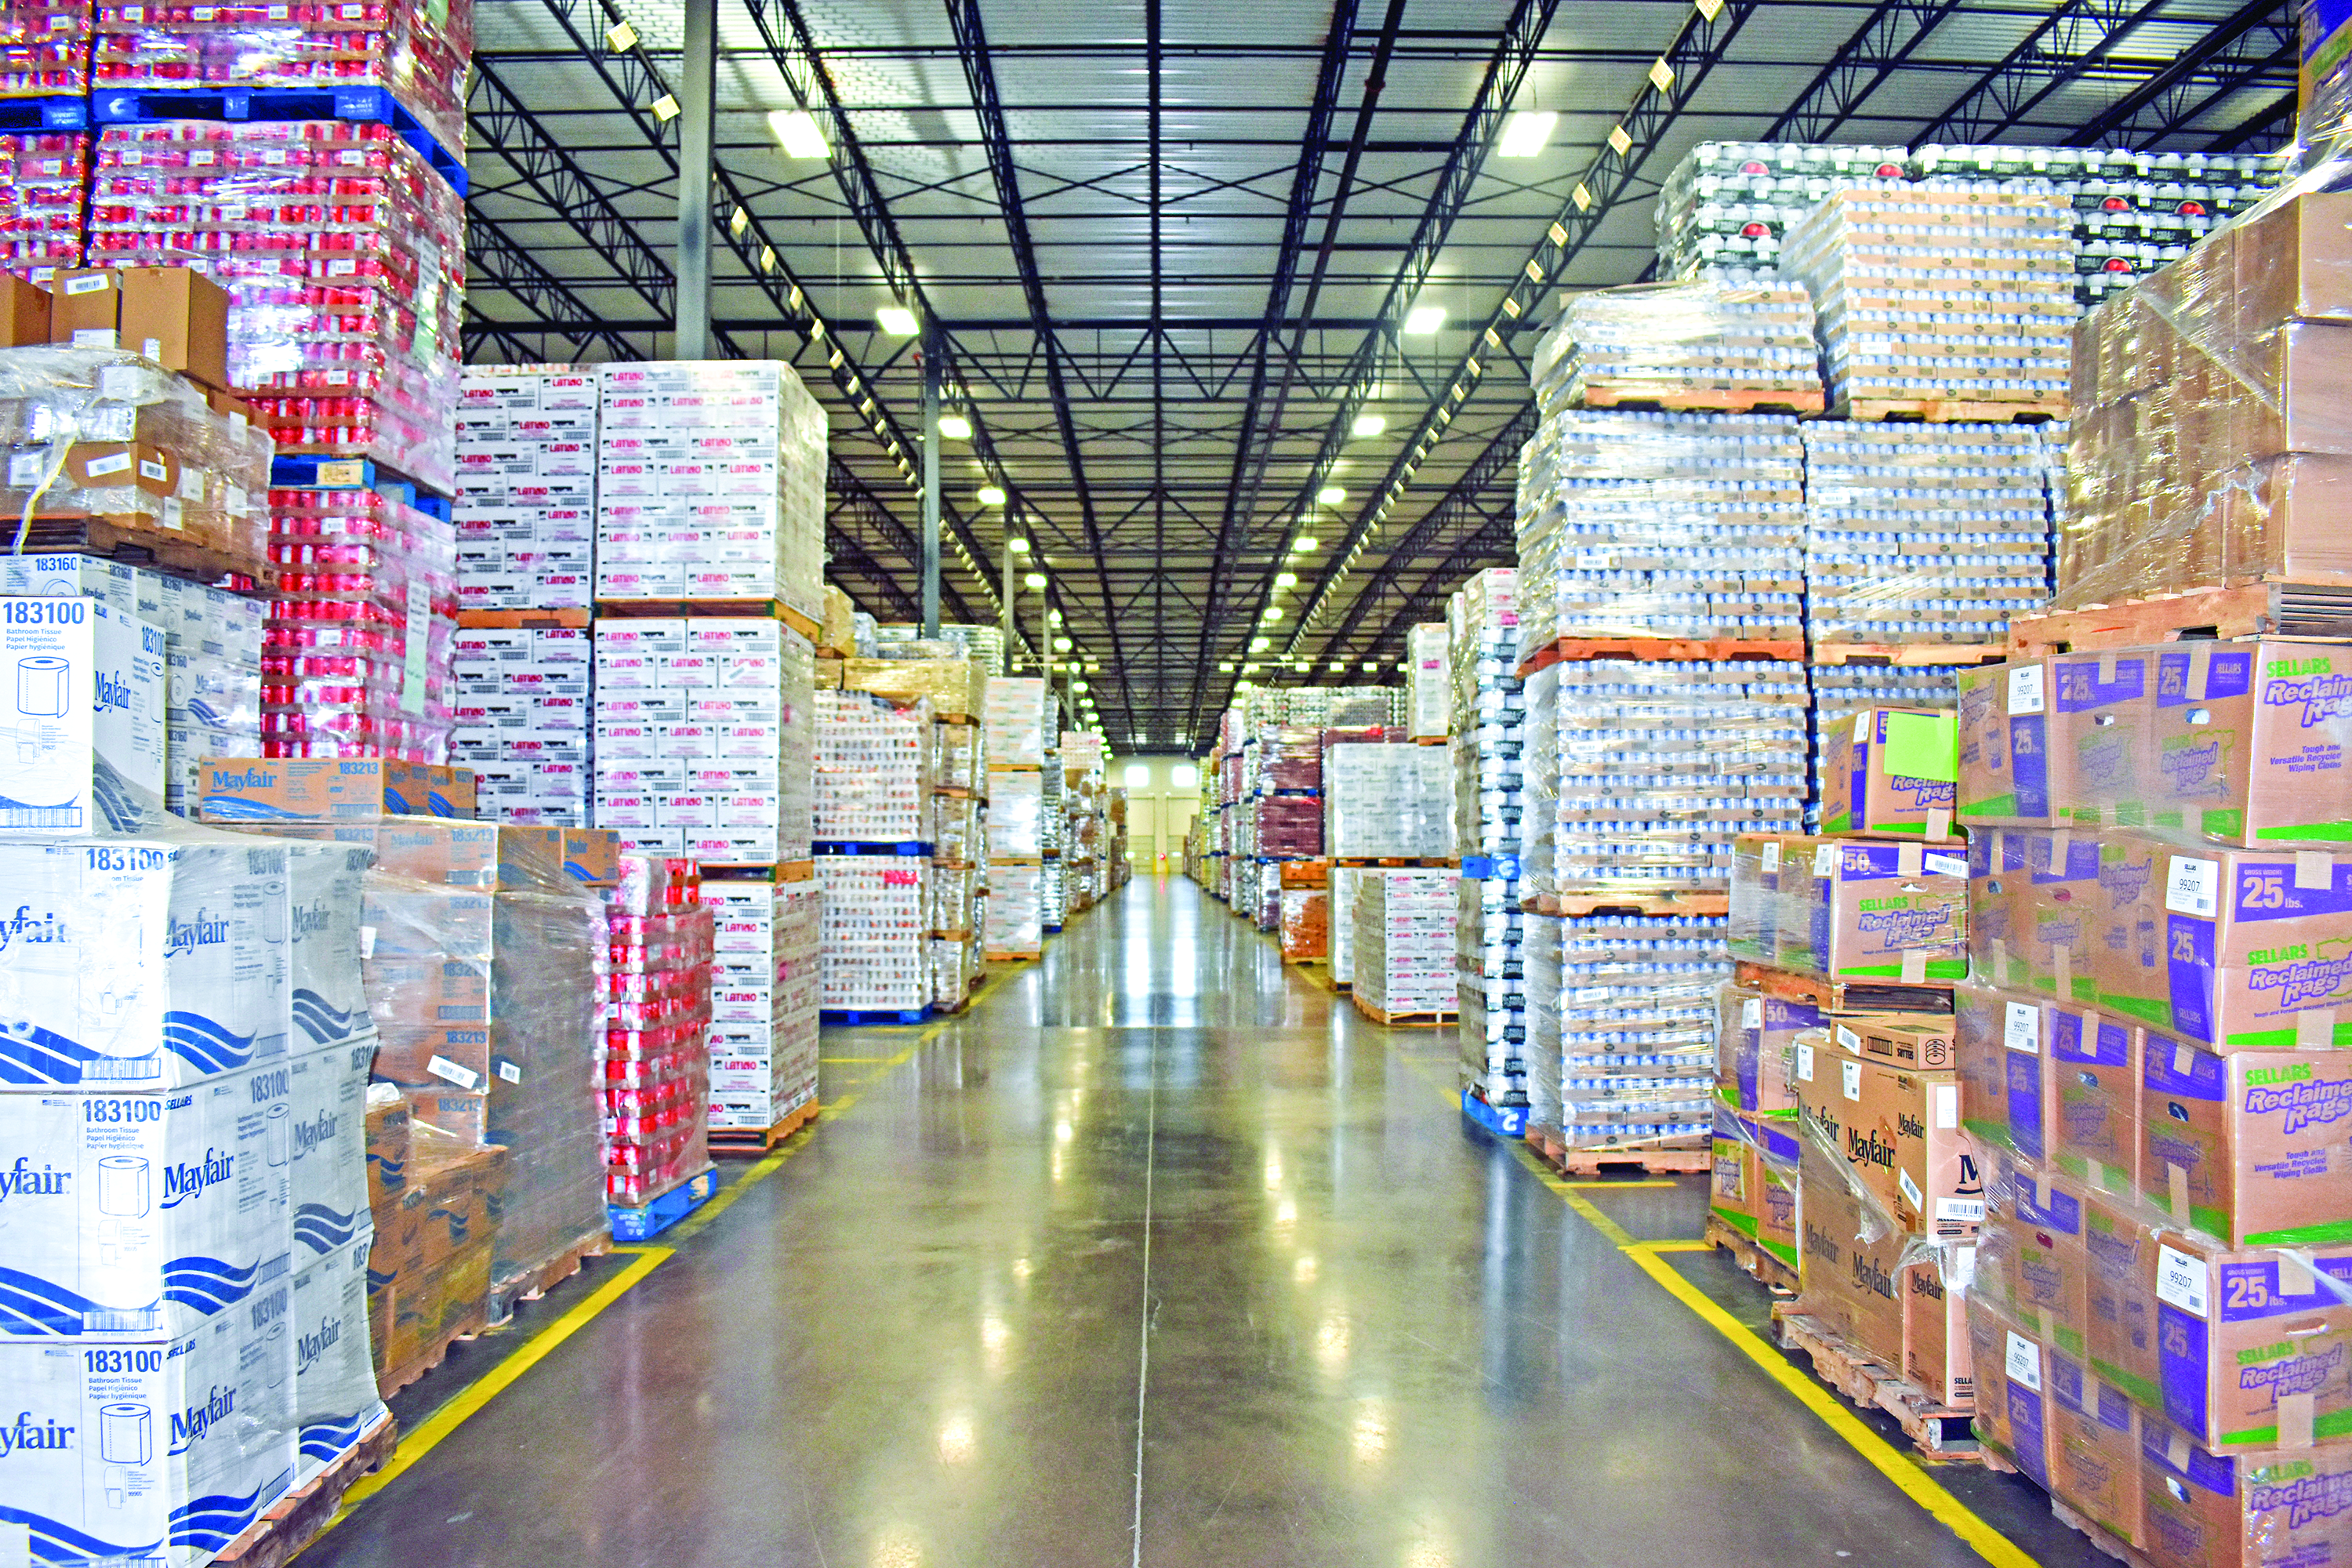 Aisle view of expansive 3PL warehouse full of a large inventory of product